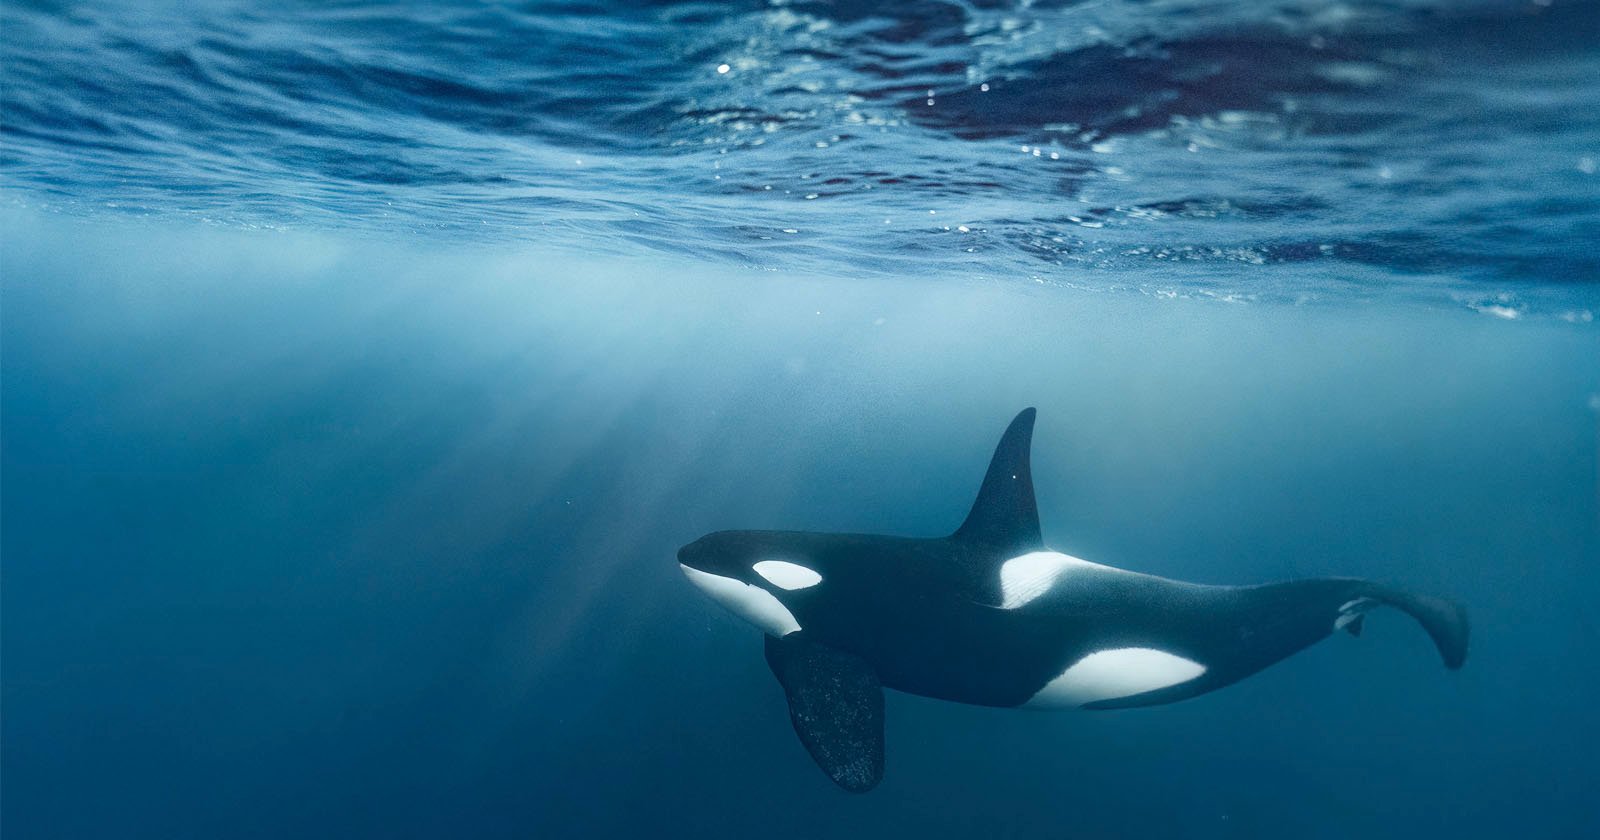 Photographer Free Dives With Orcas and Captures Incredible Photos